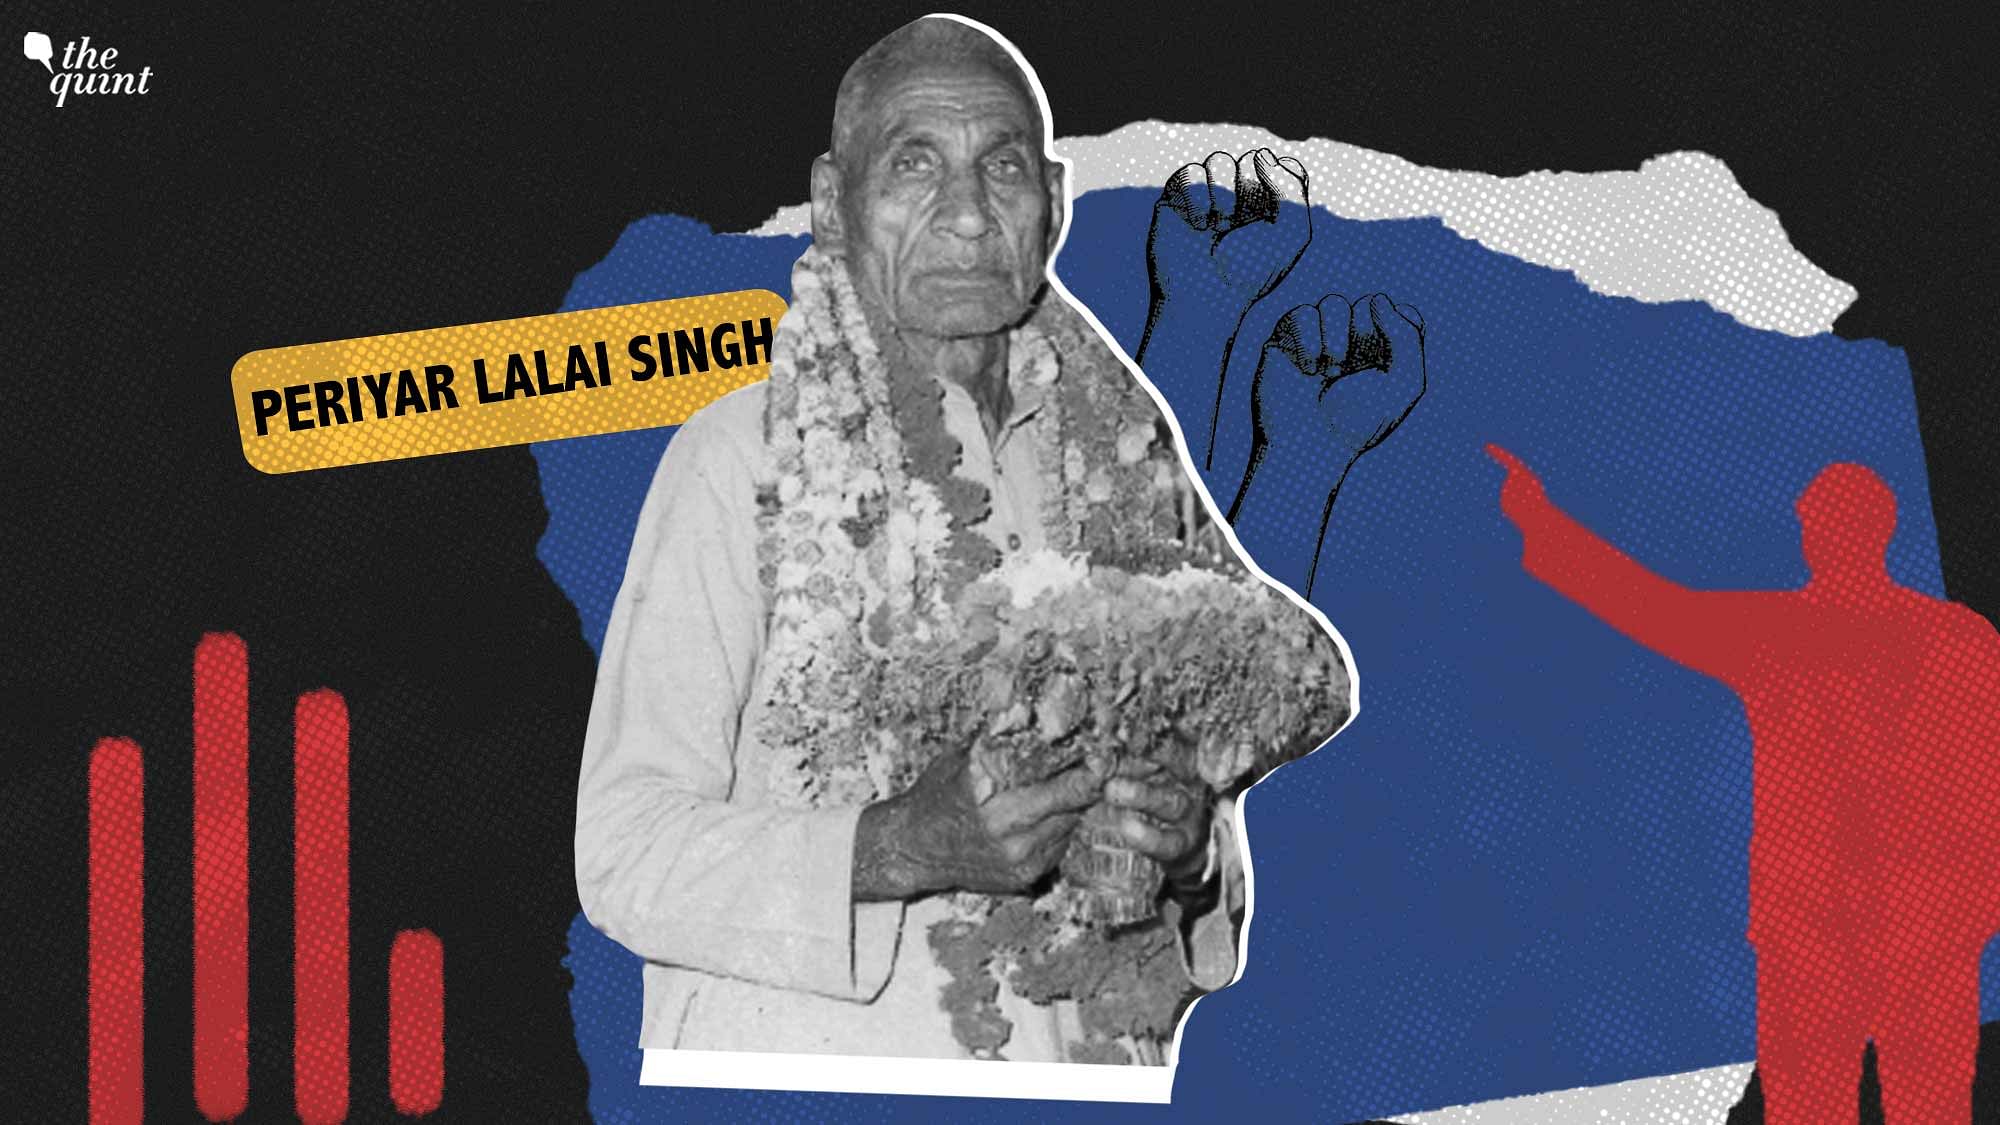 <div class="paragraphs"><p>Periyar Lalai Singh had made it his life's mission to spread the message of Ambedkarism, Periyarism and <a href="https://www.thequint.com/topic/buddhism">Buddhism</a> among the subaltern masses.</p></div>